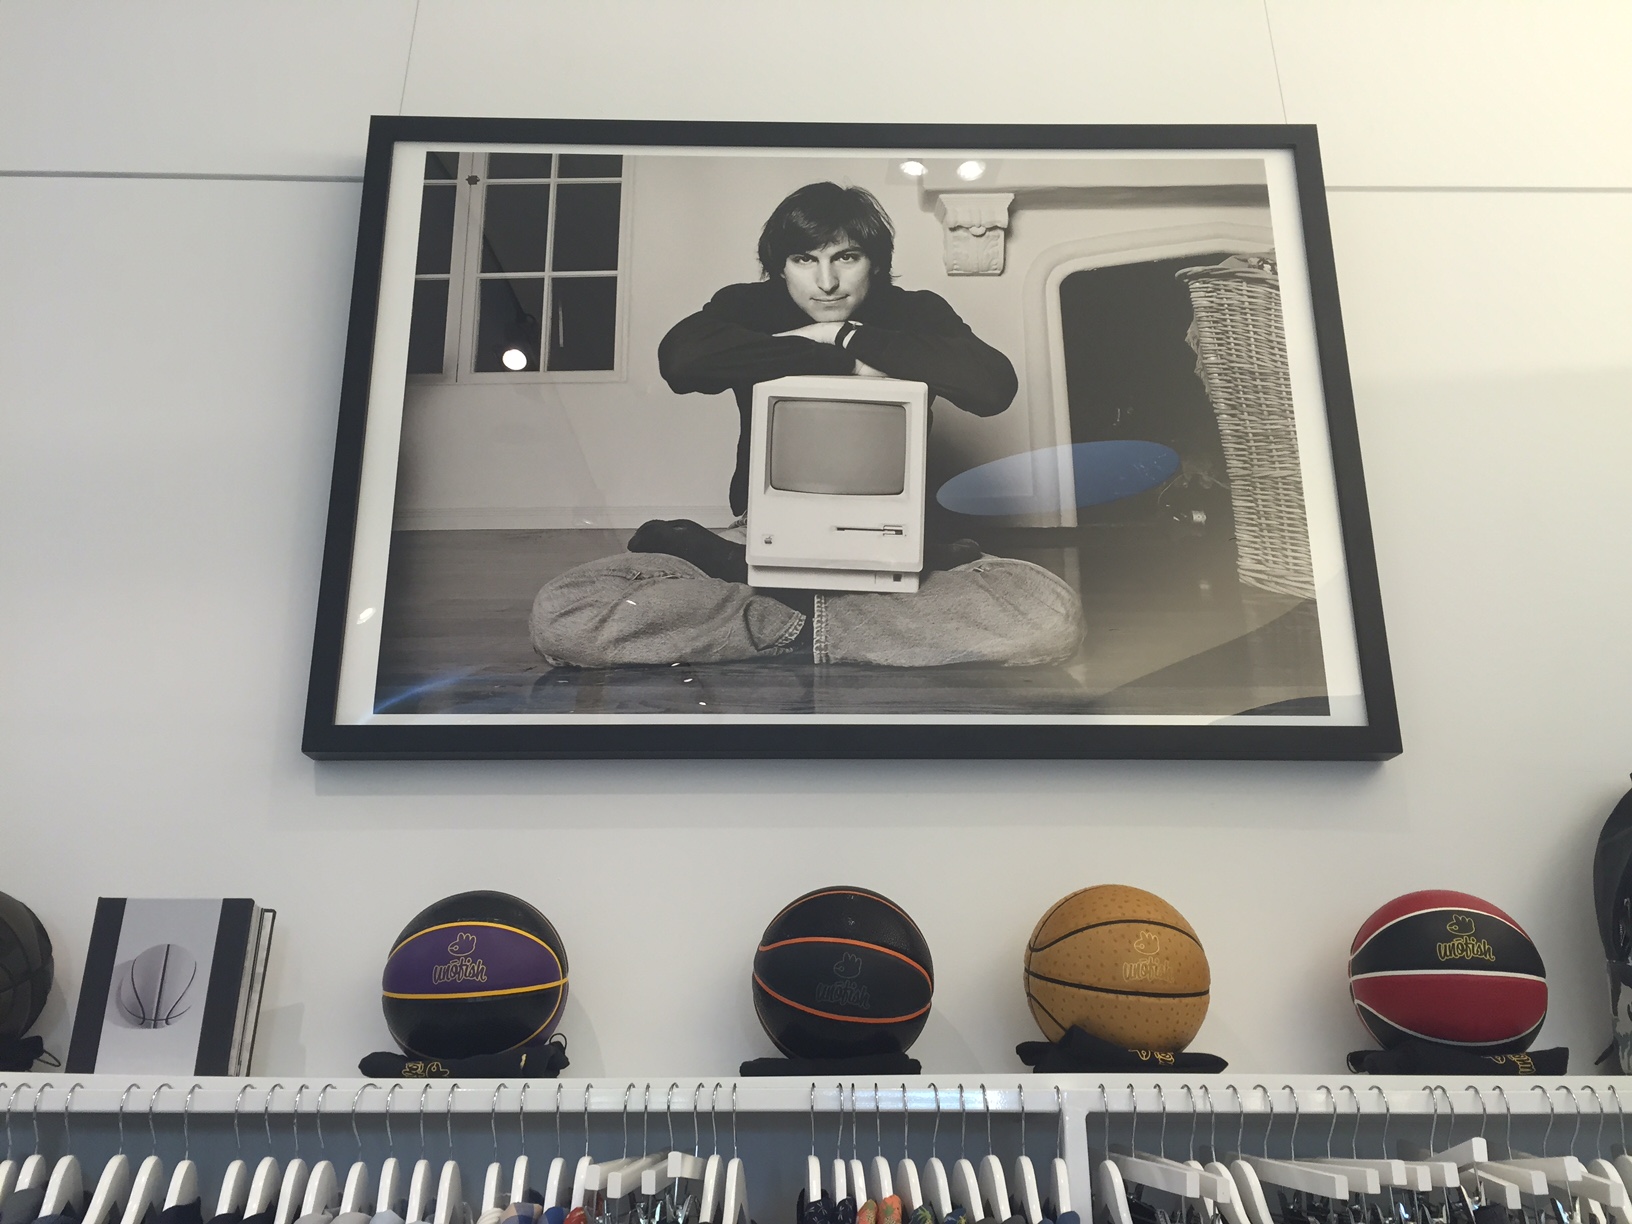 Norman Seeff's photograph of Steve Jobs on display at Ron Robinson